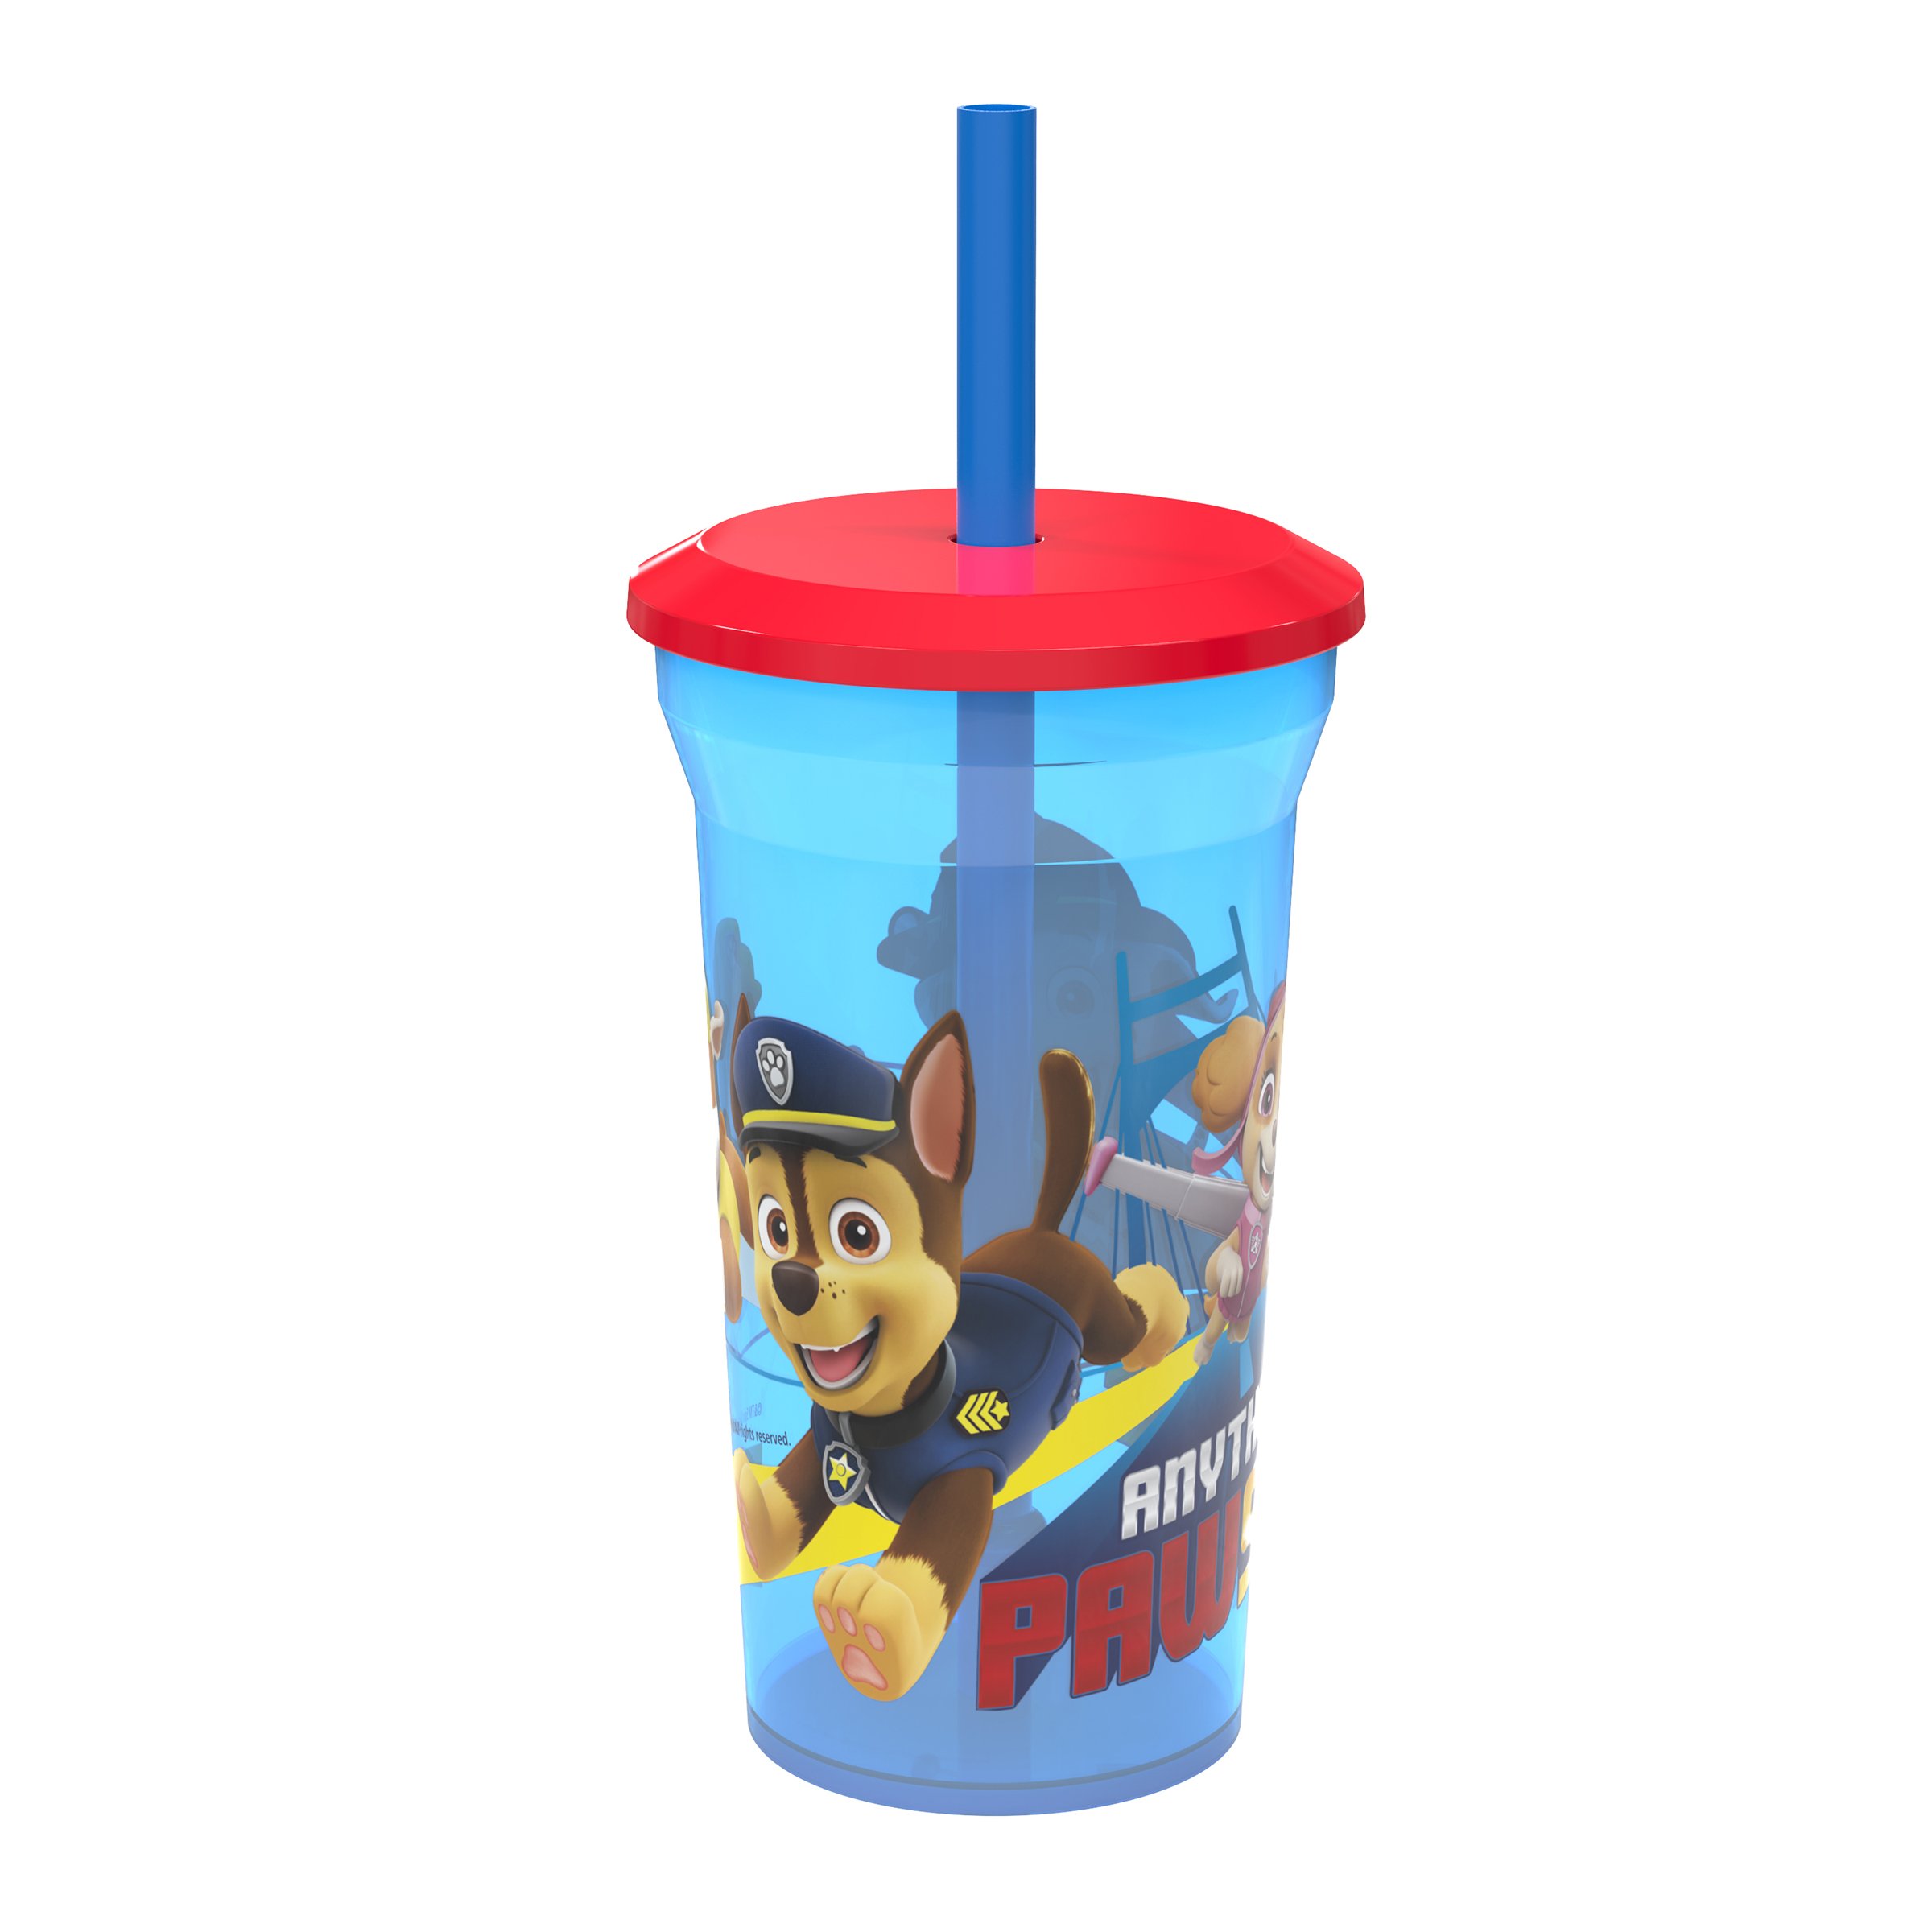 CHILDRENS TODDLERS PAW PATROL 4 SET PLASTIC TUMBLERS BEAKERS CUPS KITCHEN LUNCH 